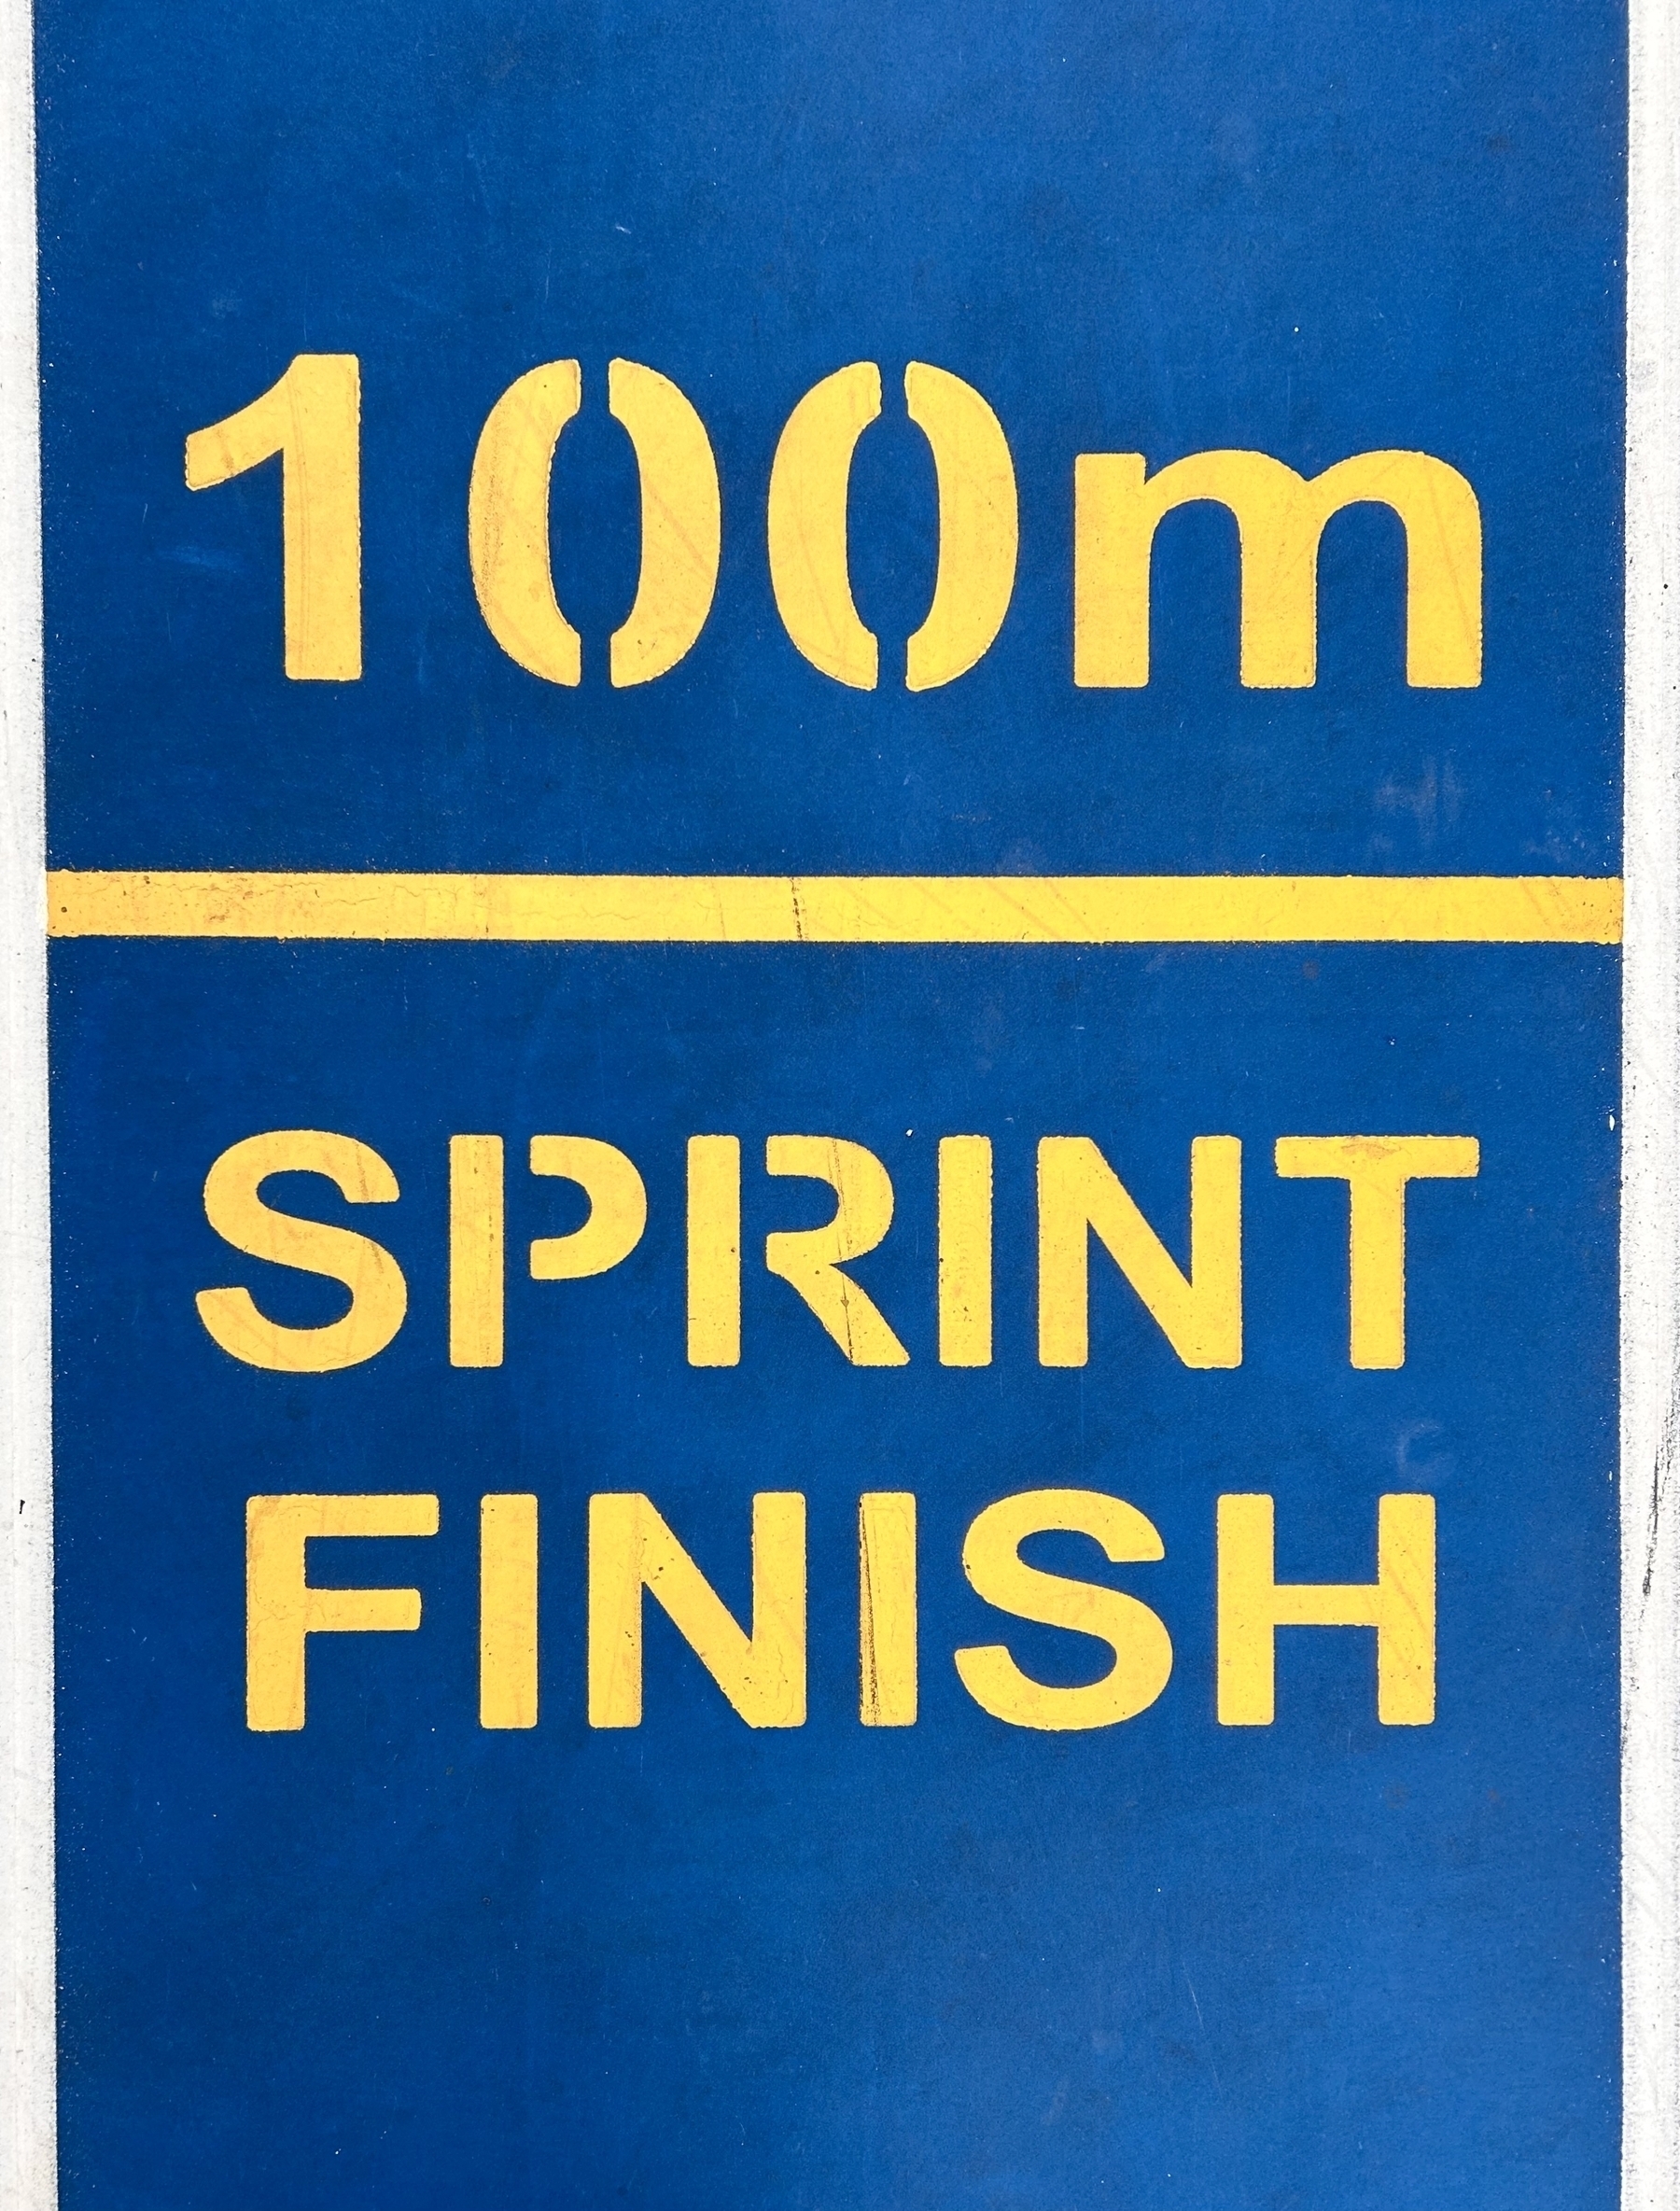 A line on concrete. Stencilled above and below it is "100m SPRINT FINISH"